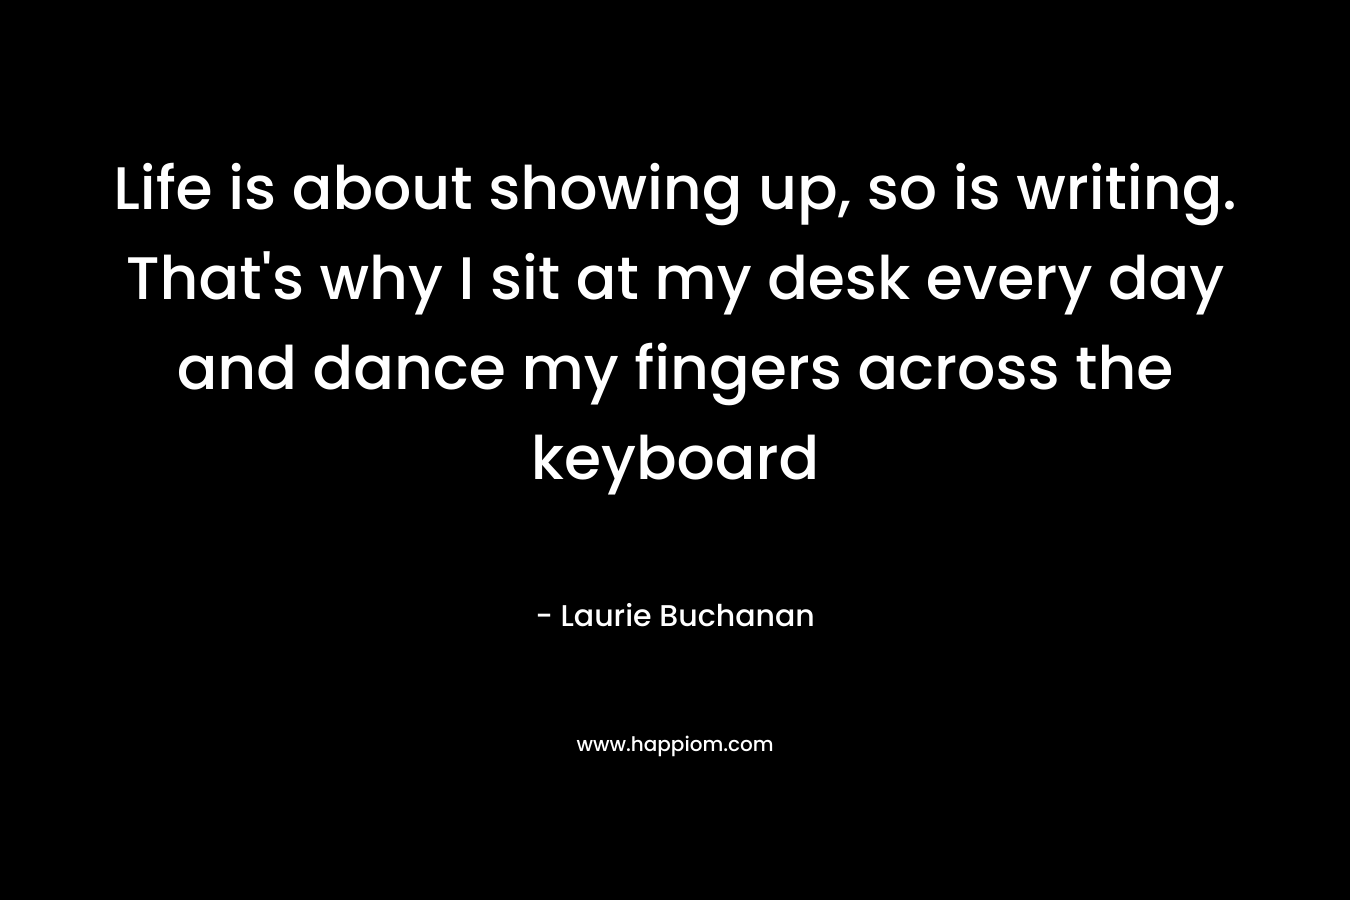 Life is about showing up, so is writing. That’s why I sit at my desk every day and dance my fingers across the keyboard – Laurie Buchanan